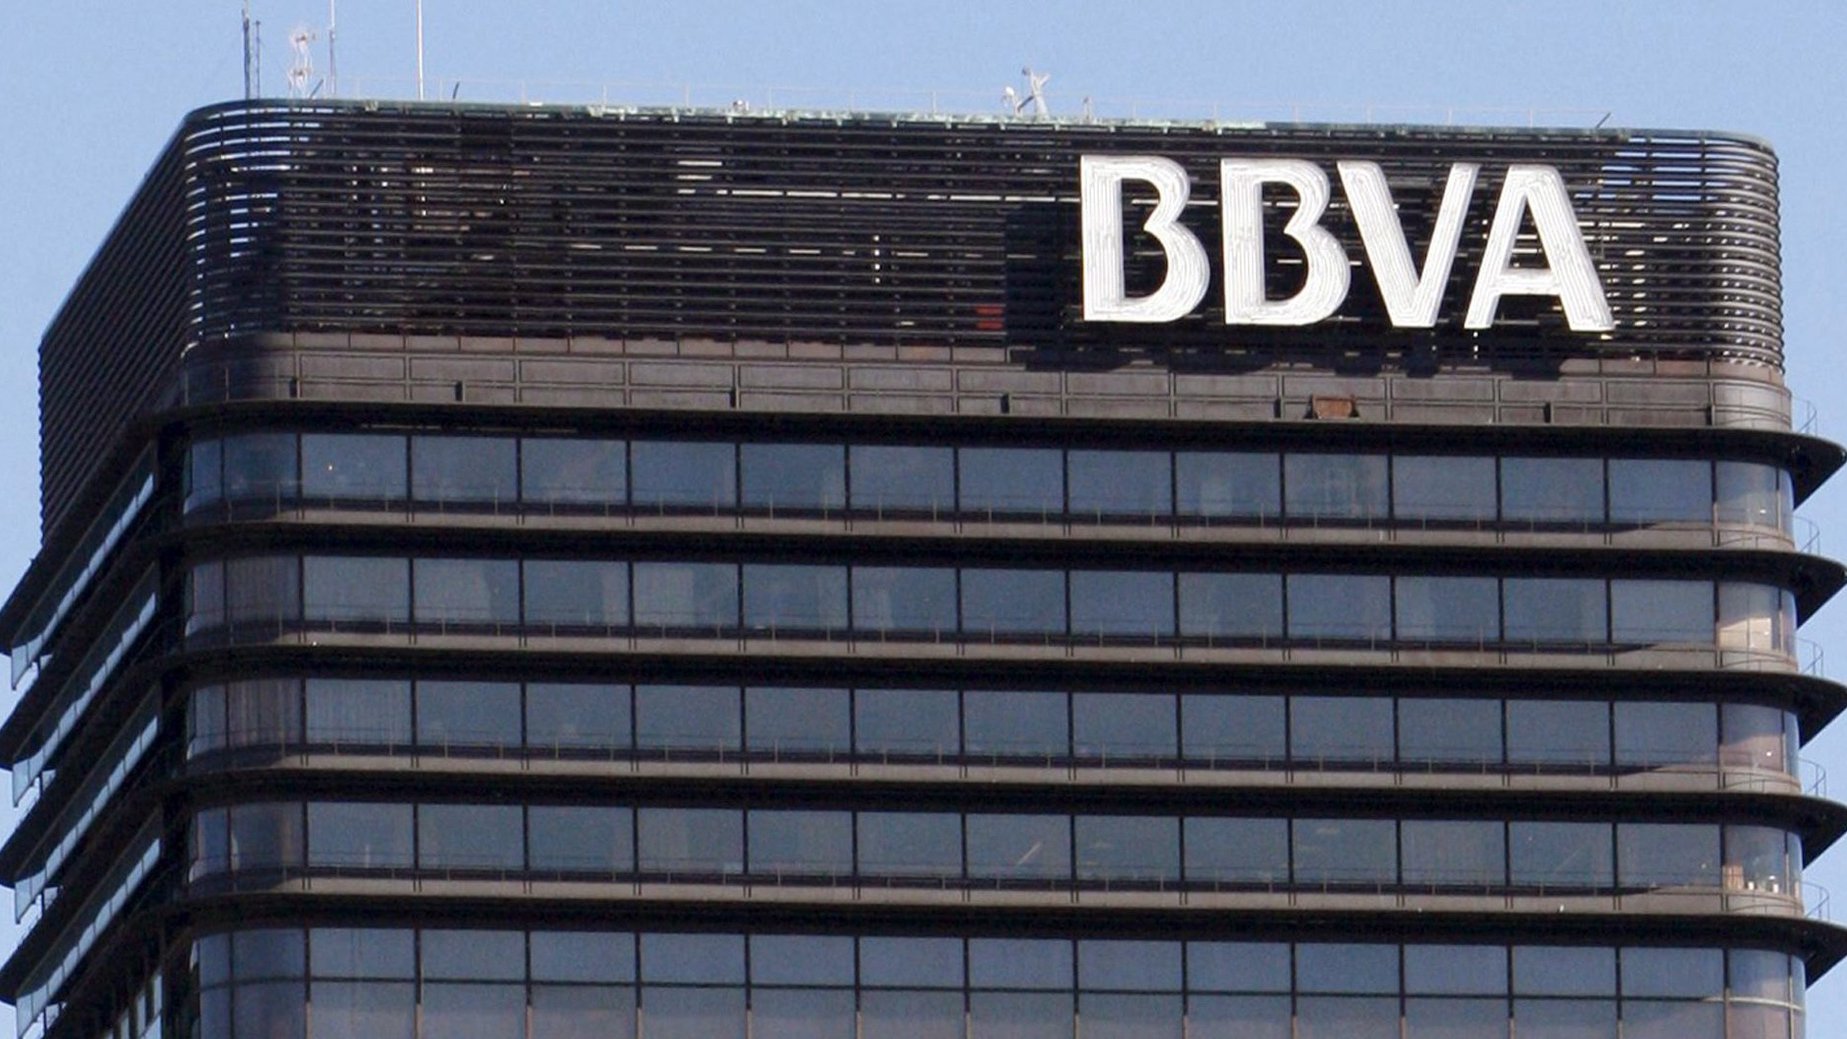 epa02259045 (FILE) A file photograph showing the logo on the headquarters of the Spanish bank BBVA in Madrid, Spain on 02 April 2008. The BBVA, as well as all other Spanish banks, passed a EU-wide stress-testing exercise conducted by the Committee of European Banking Supervisors (CEBS) and published on 23 July 2010. Four Spanish savings-and-loan banks, however, failed the stress test.  EPA/MANUEL H DE LEON